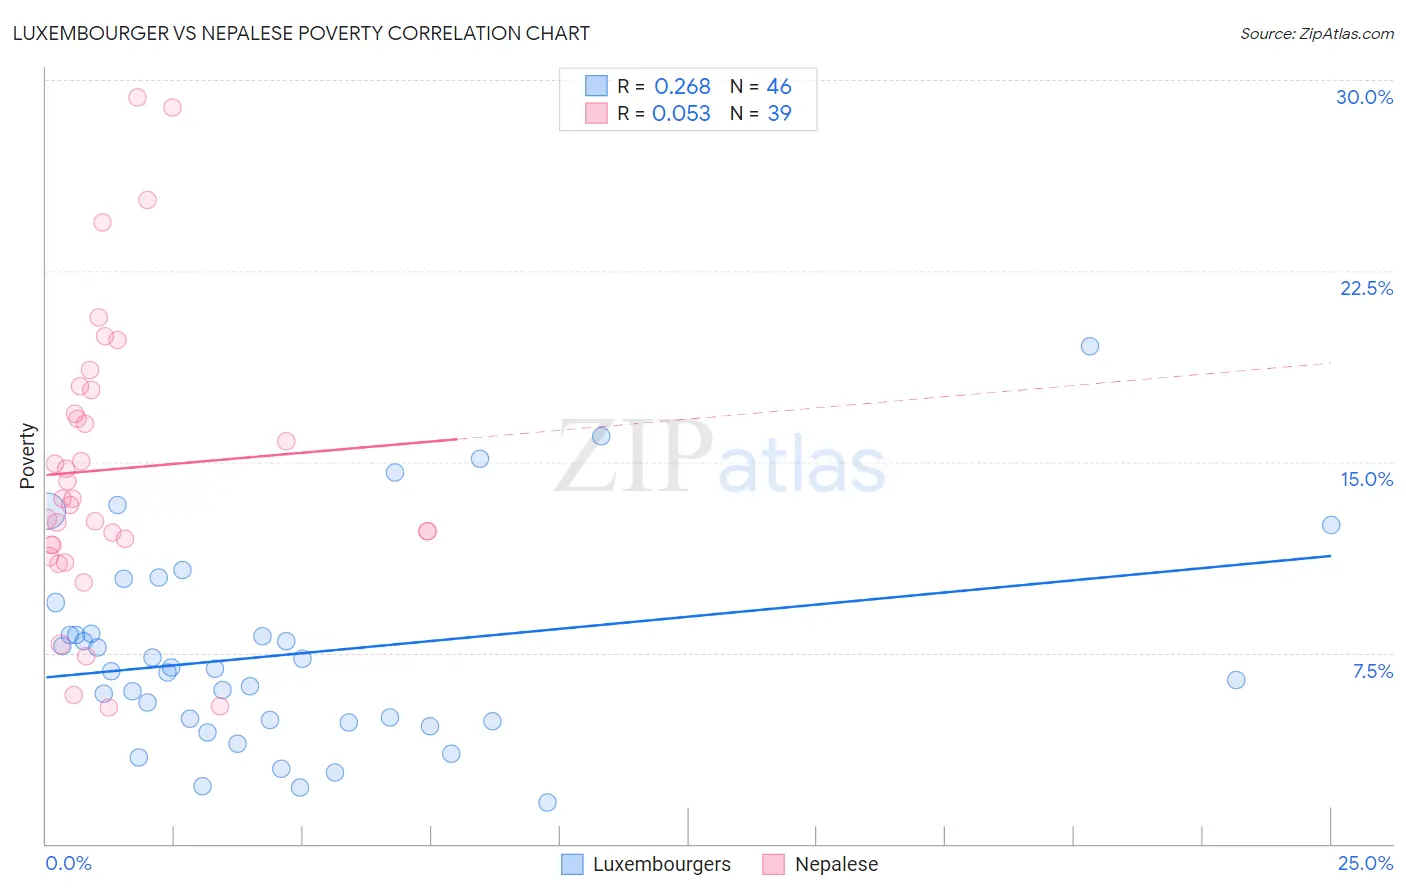 Luxembourger vs Nepalese Poverty